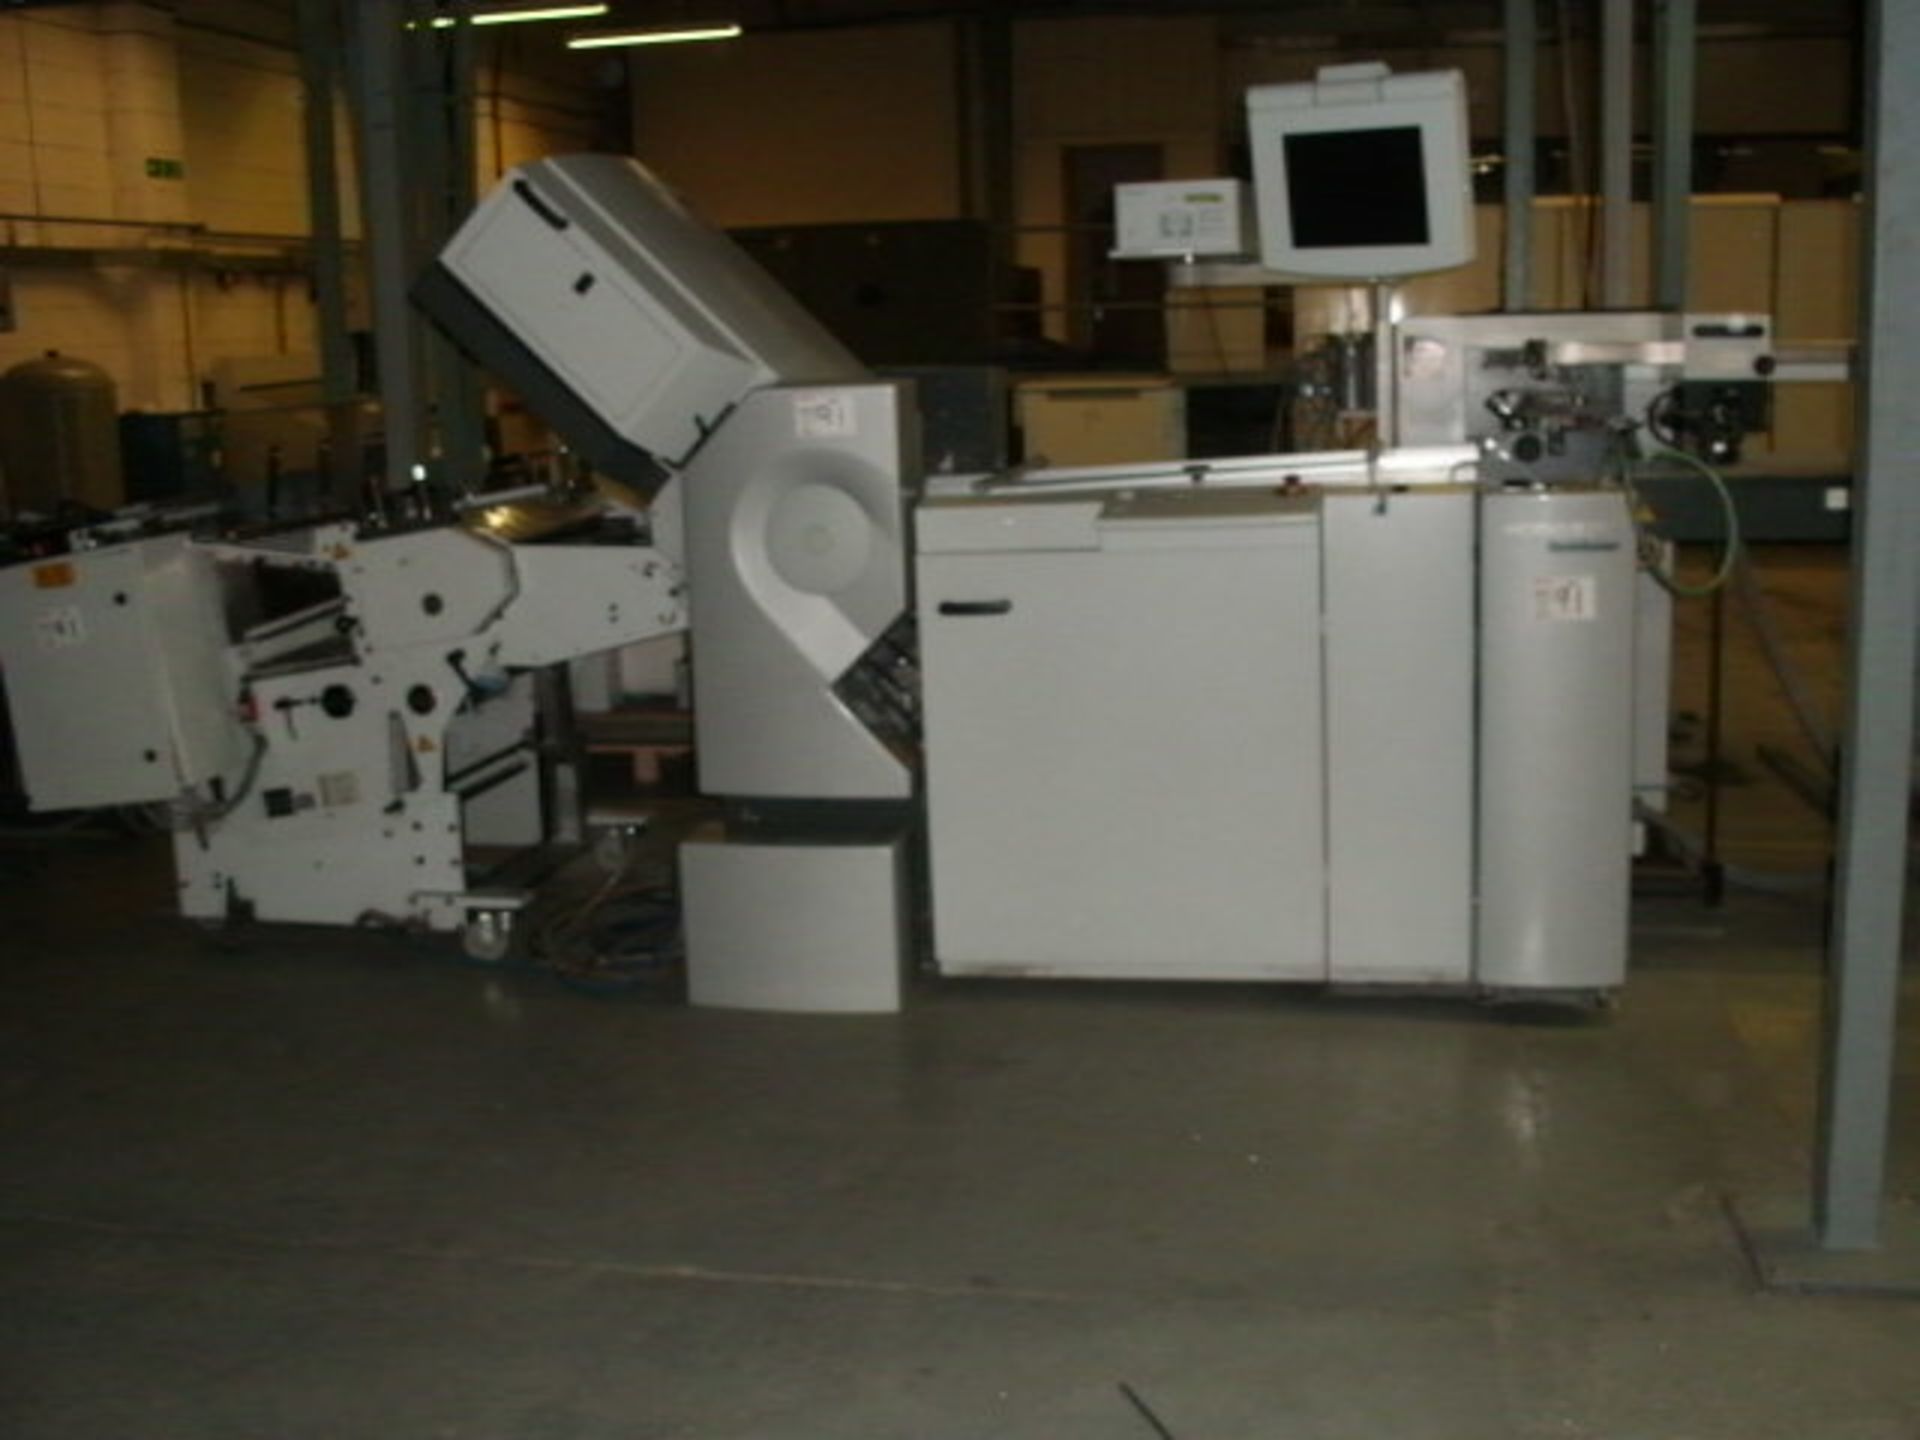 2010 HEIDELBERG STAHLFOLDER model BUH-56-64, product no 1224 431588, serial no FH-E5AA-00582 with